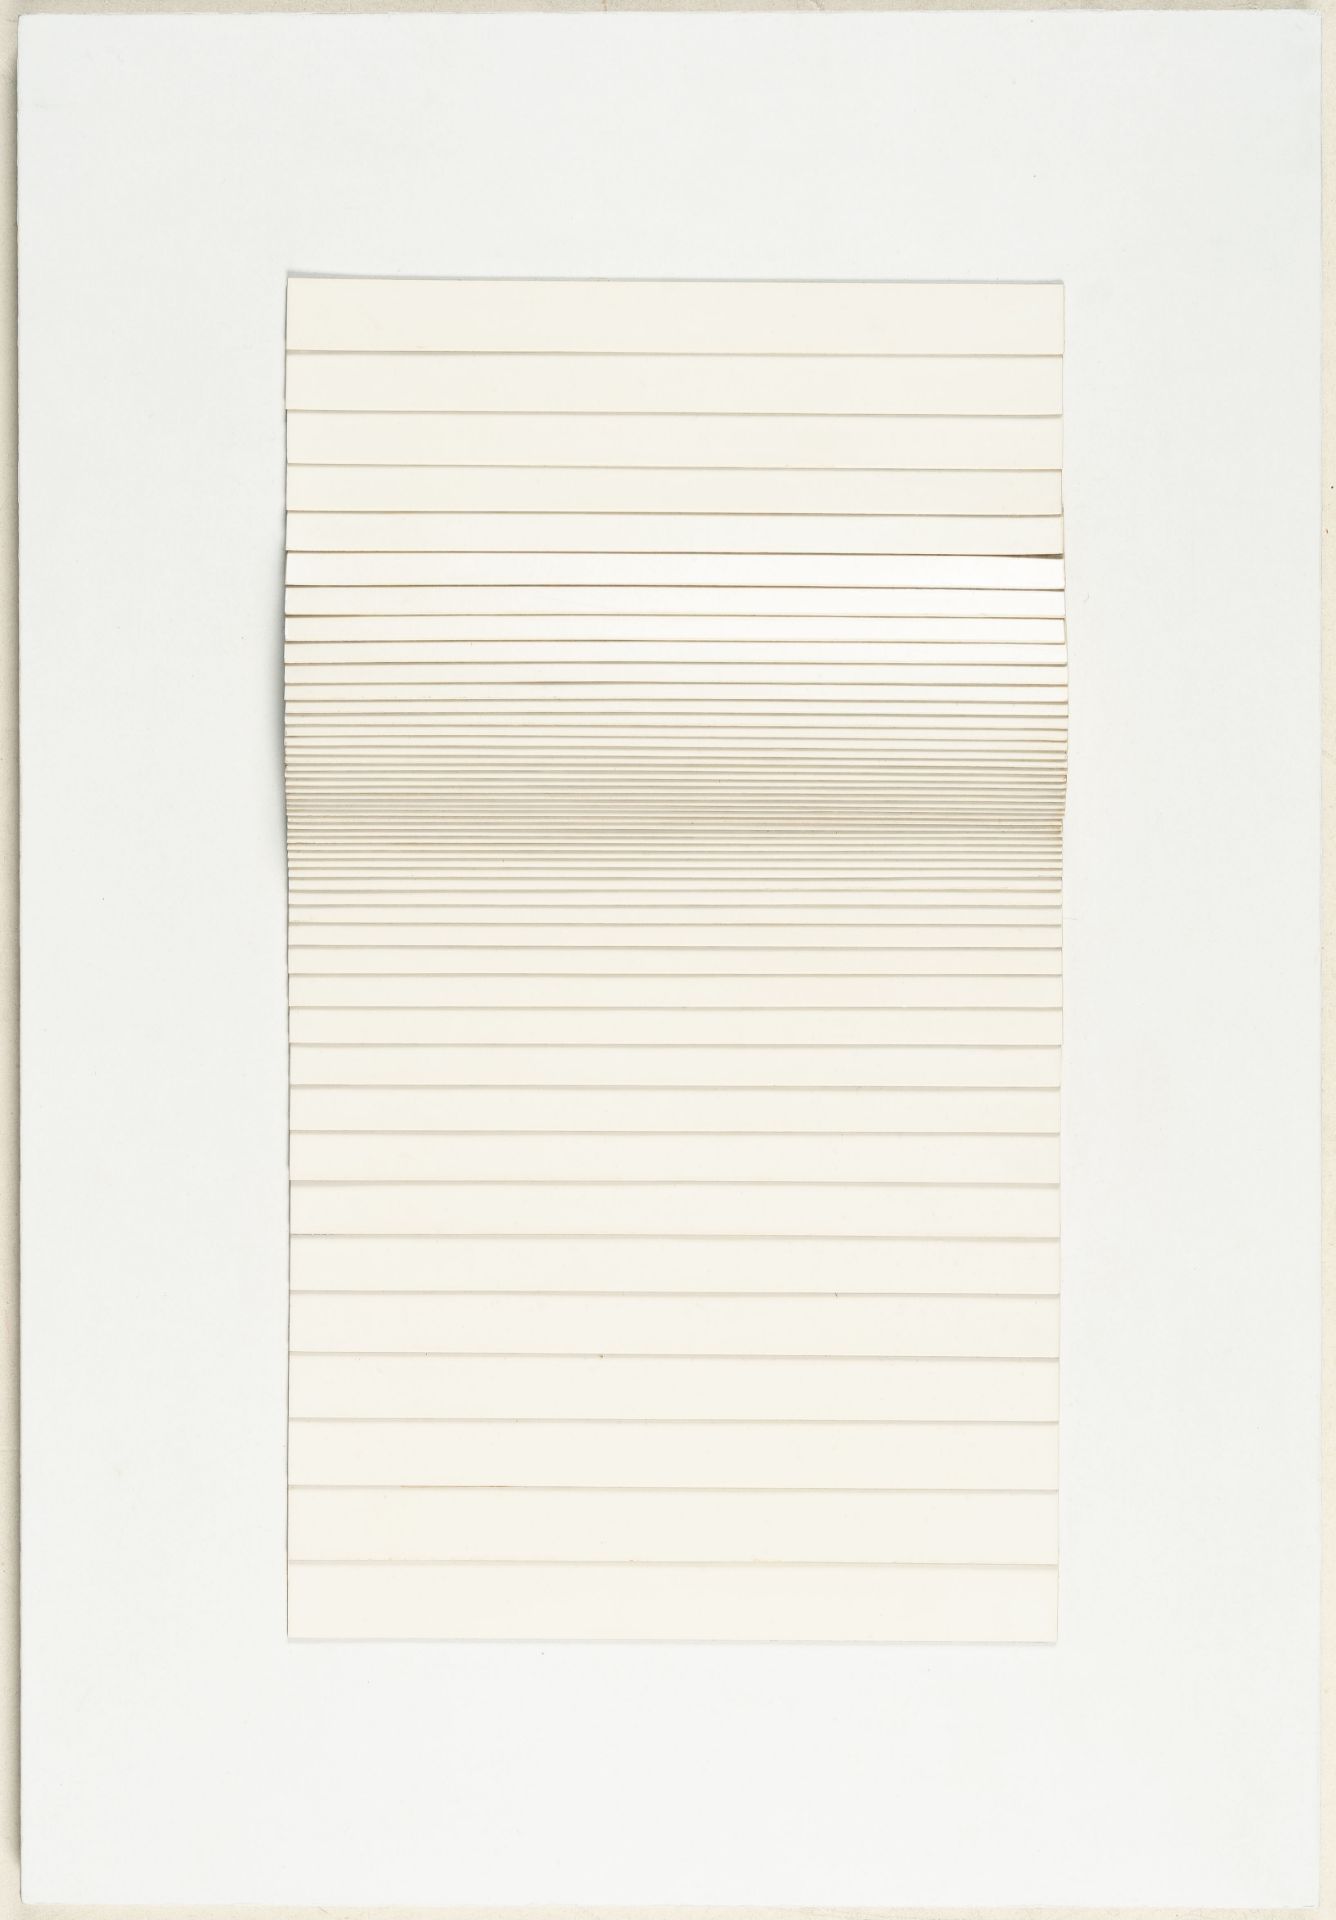 Leo Erb, “No. 27” (Horizontal slat structure).Mixed media with wood and lacquer, laid down on panel. - Image 2 of 4